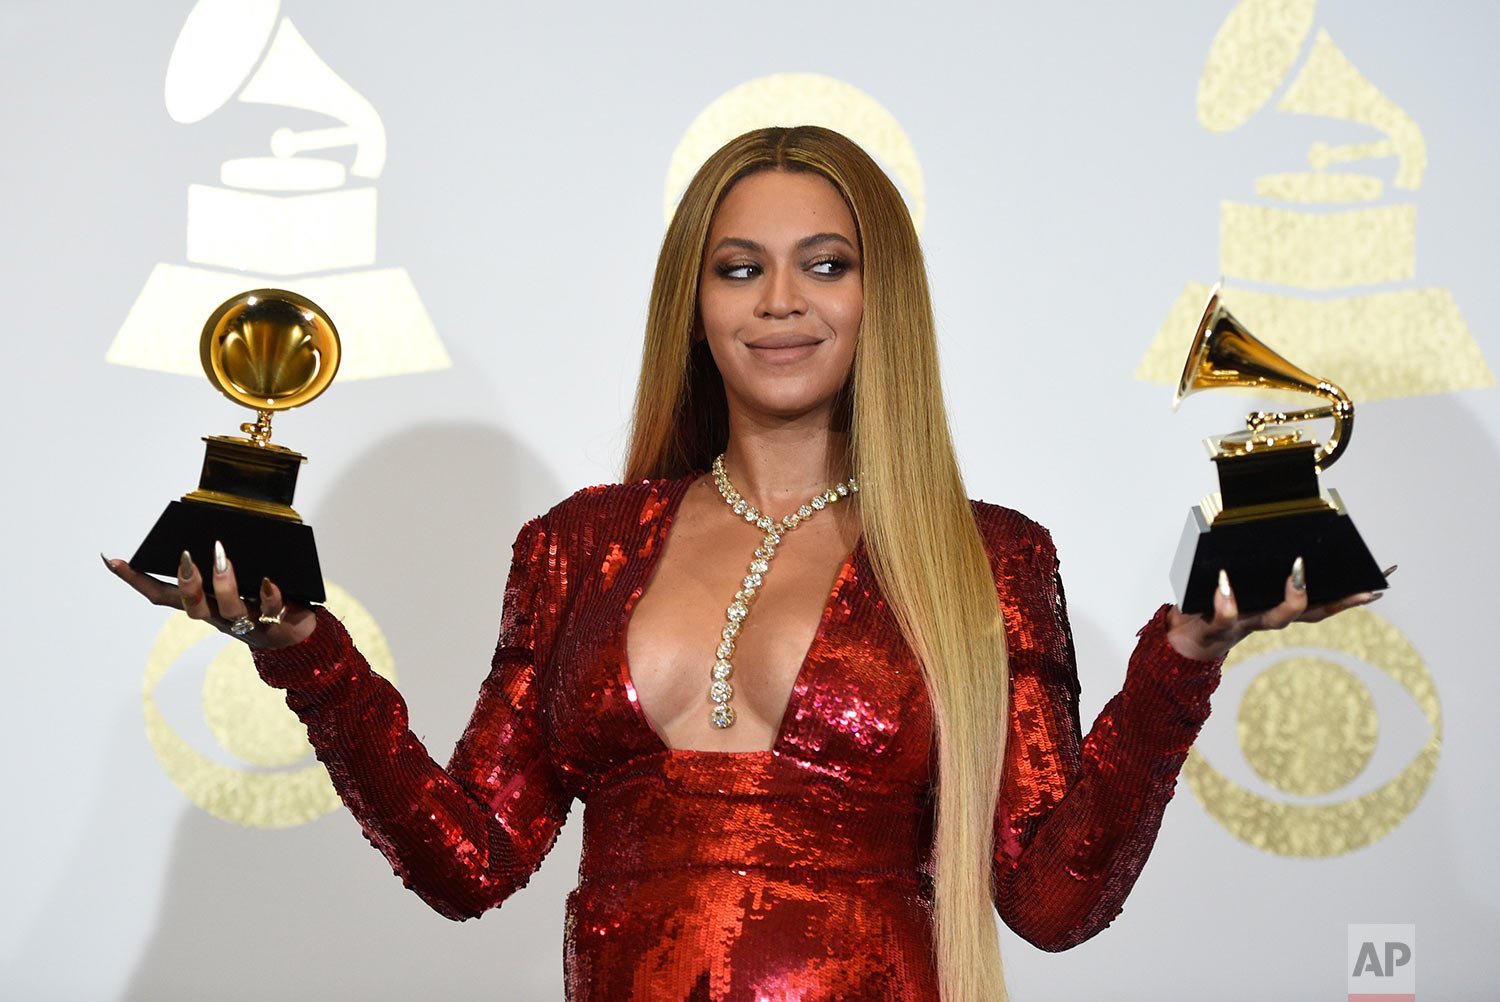  Beyonce poses in the press room with the awards for best music video for "Formation" and best urban contemporary album for "Lemonade" at the 59th annual Grammy Awards at the Staples Center on Sunday, Feb. 12, 2017, in Los Angeles. (Photo by Chris Pi